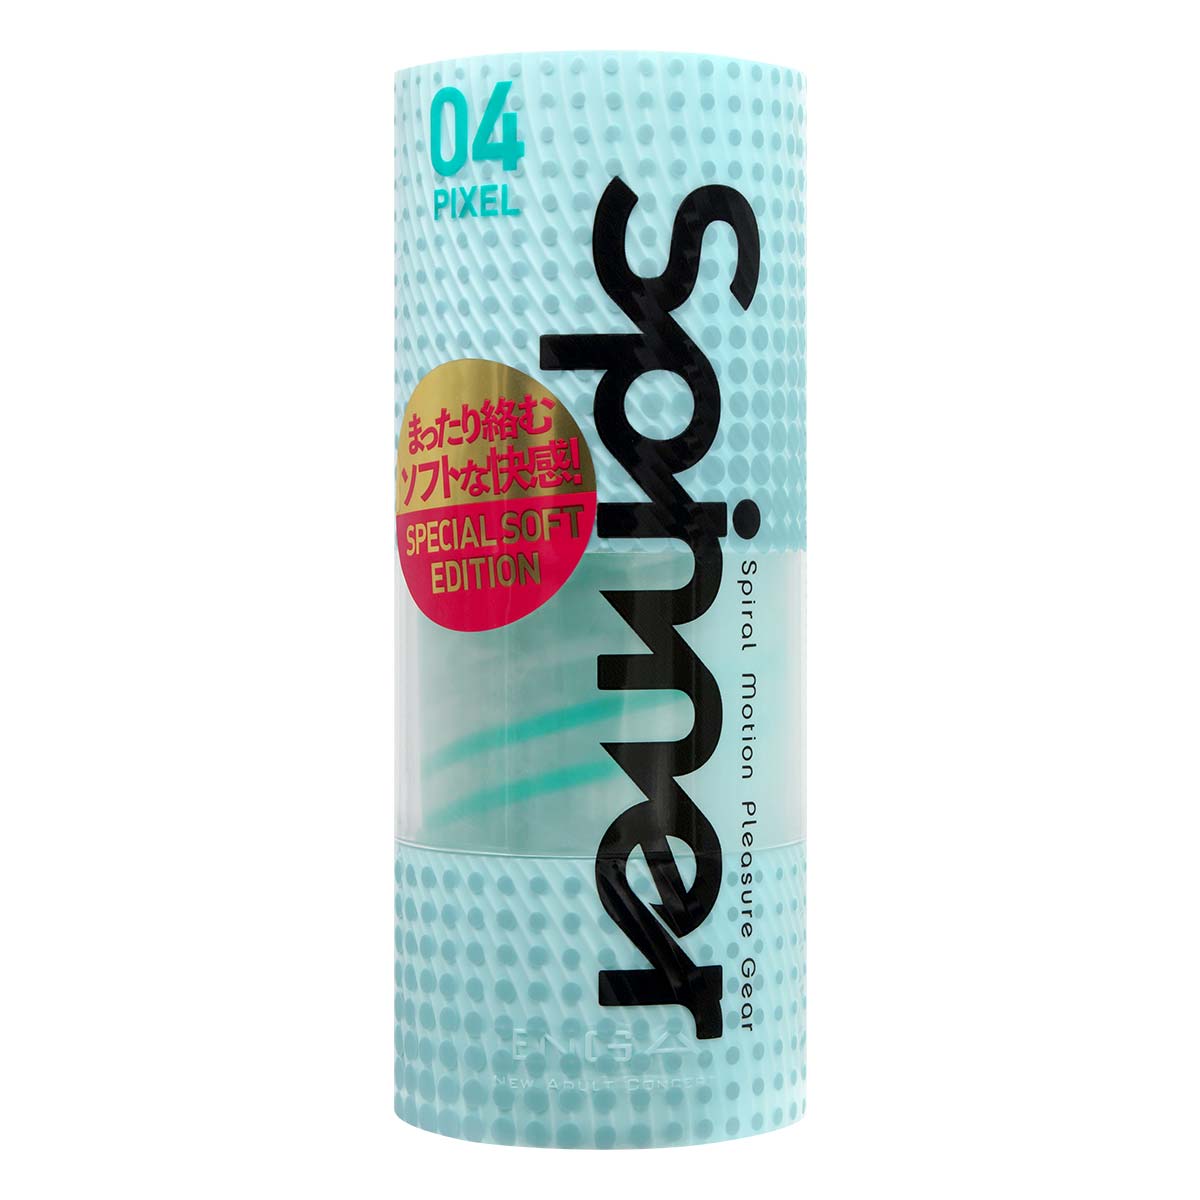 TENGA Spinner PIXEL Special Soft Edition-p_2